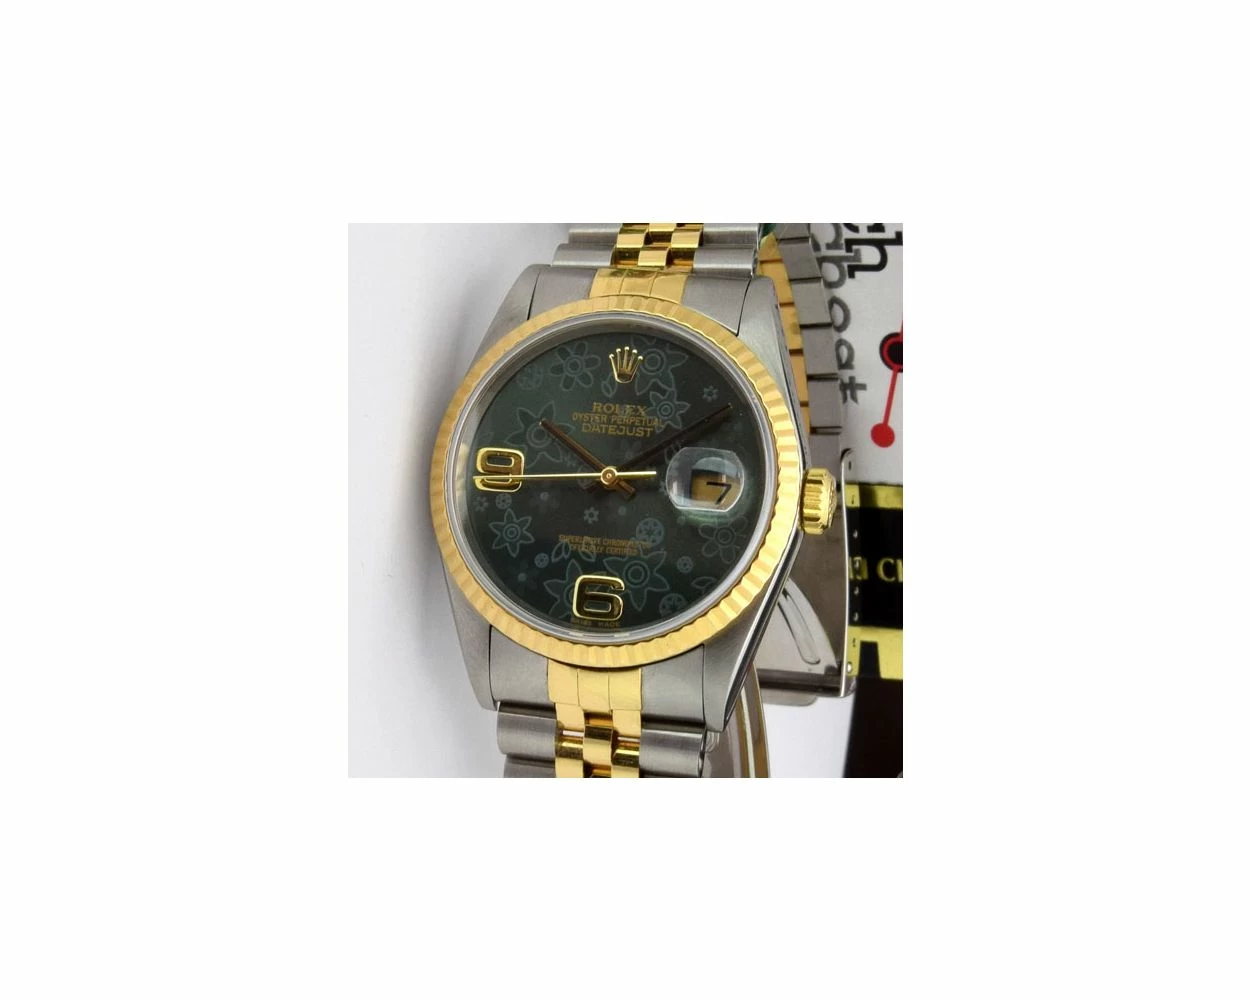 Rolex Datejust Gold Steel Green Floral Dial 16233 Oyster Watch